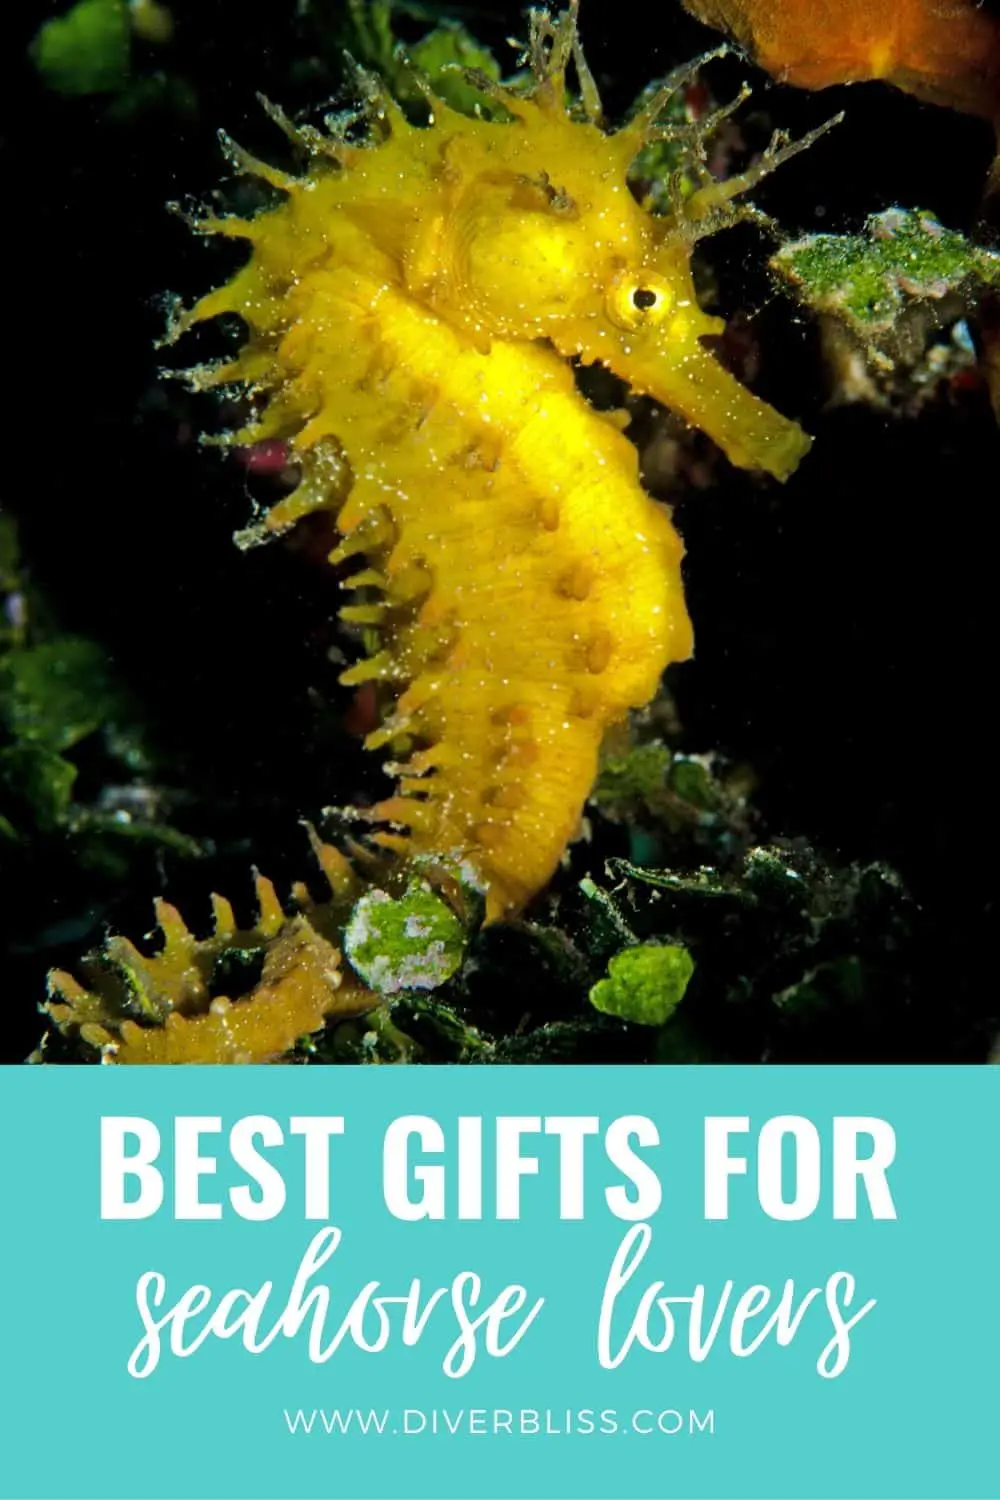 best gifts for seahorse lovers